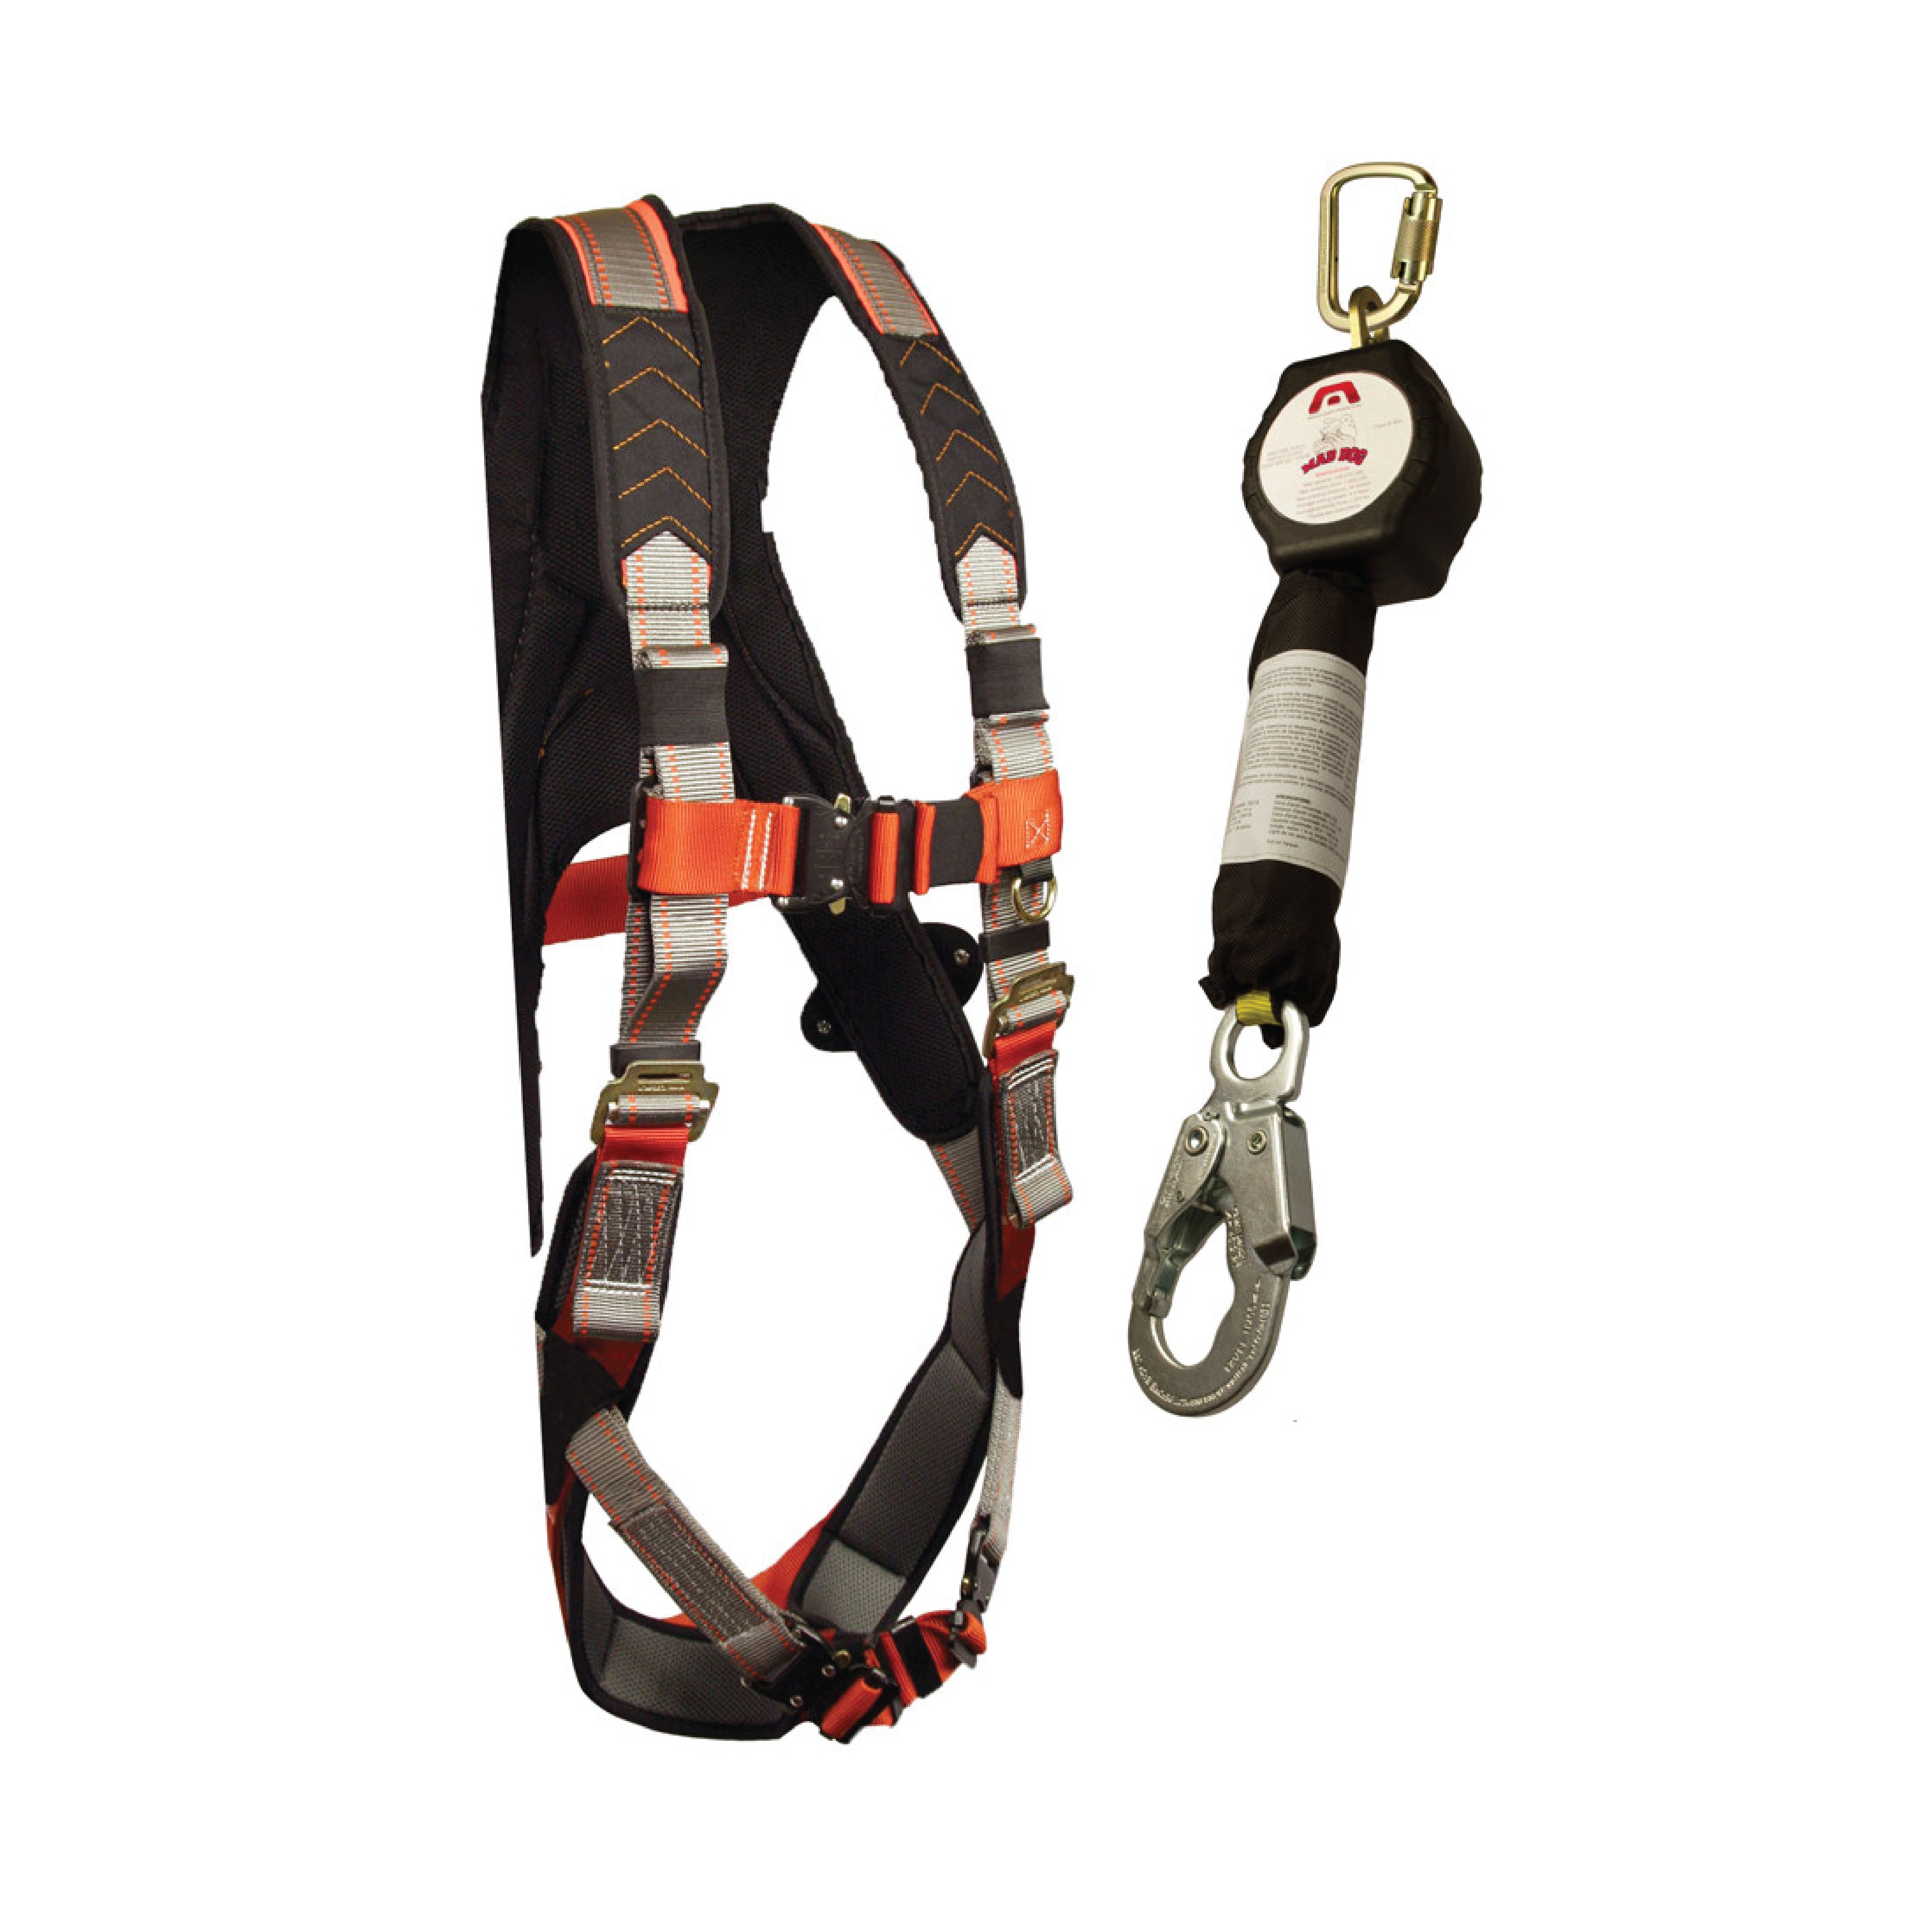 Madaco's Maximus harness w/ Mad Dog 6ft Self Retractable Lanyard – Madaco  Safety Products